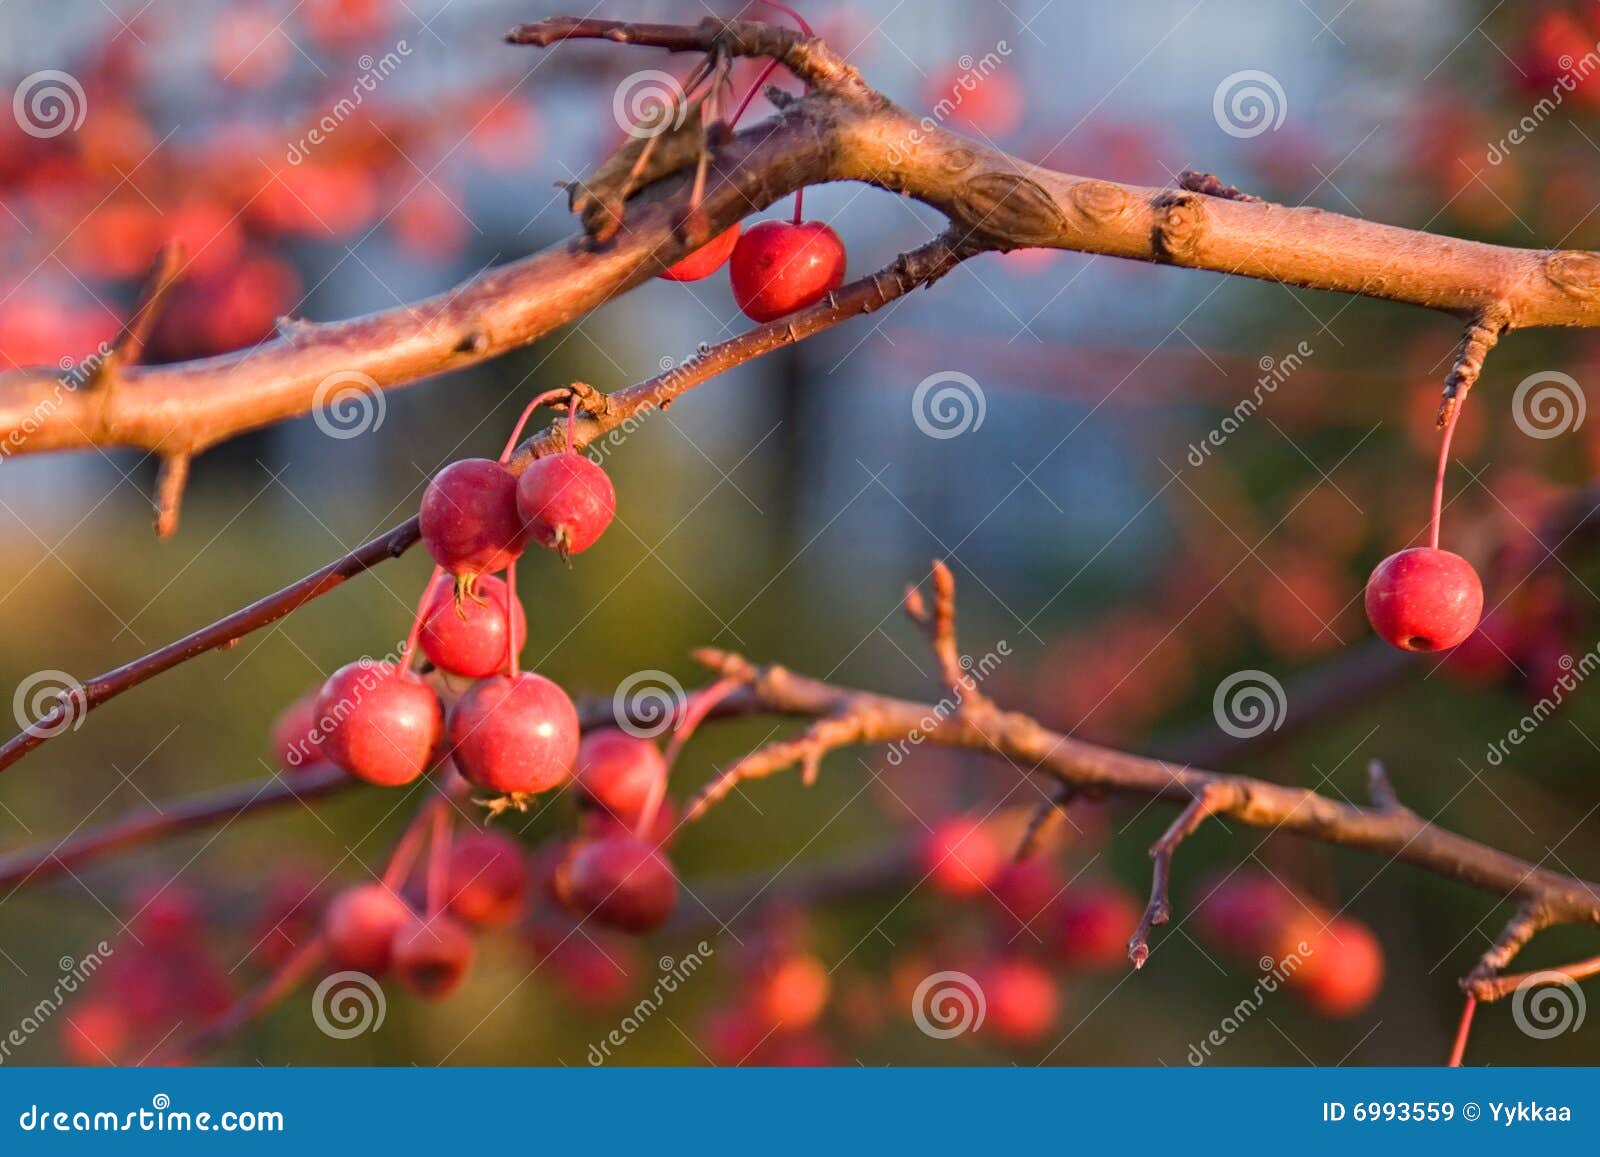 Berries on a branch. stock image. Image of park, beauty - 6993559